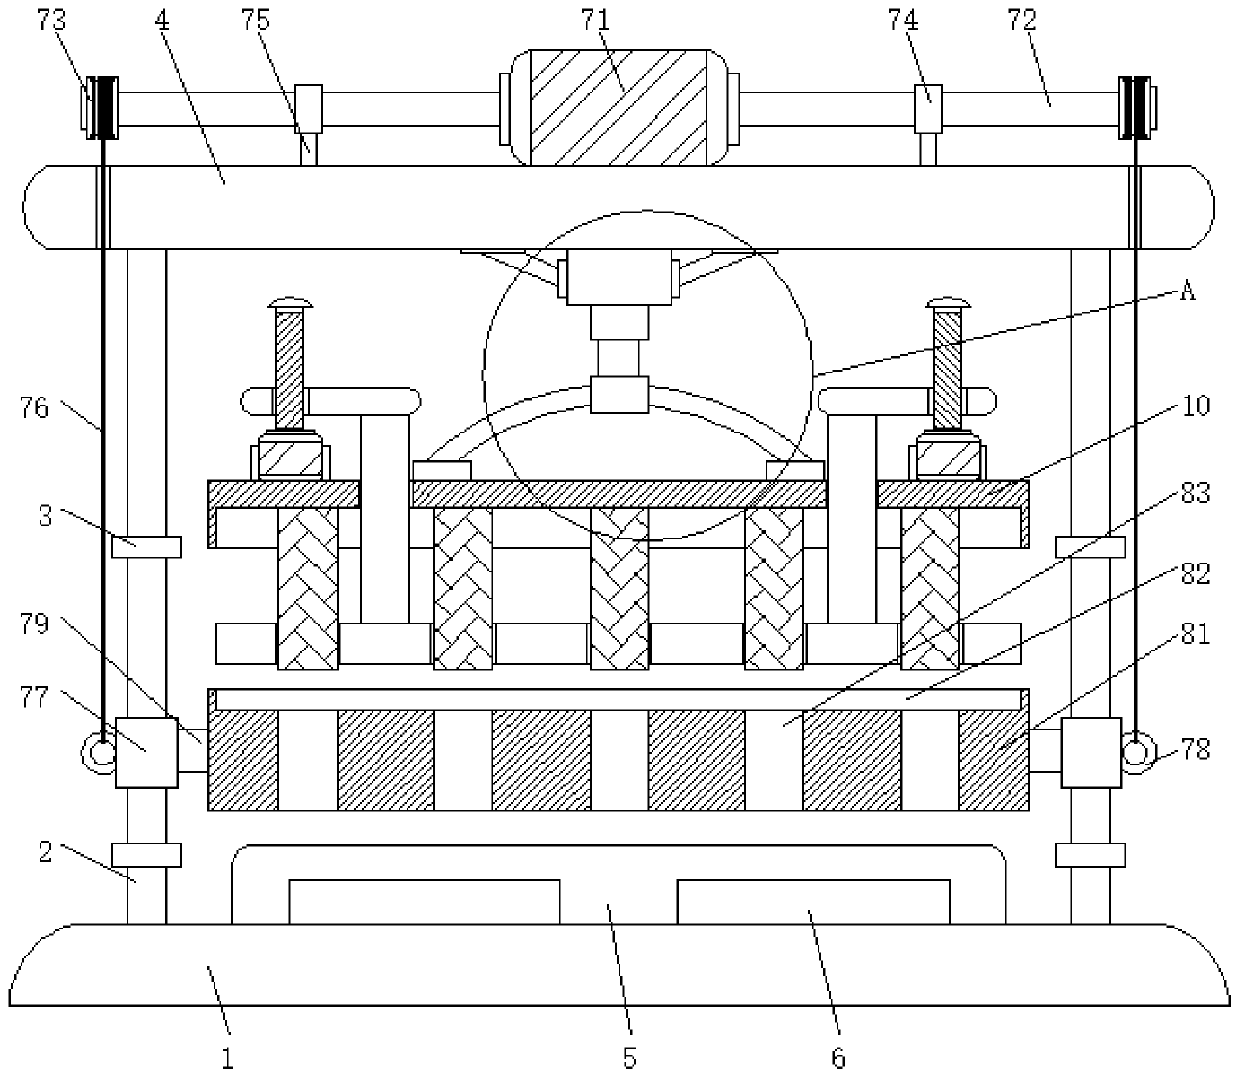 A cement brick production and demoulding device